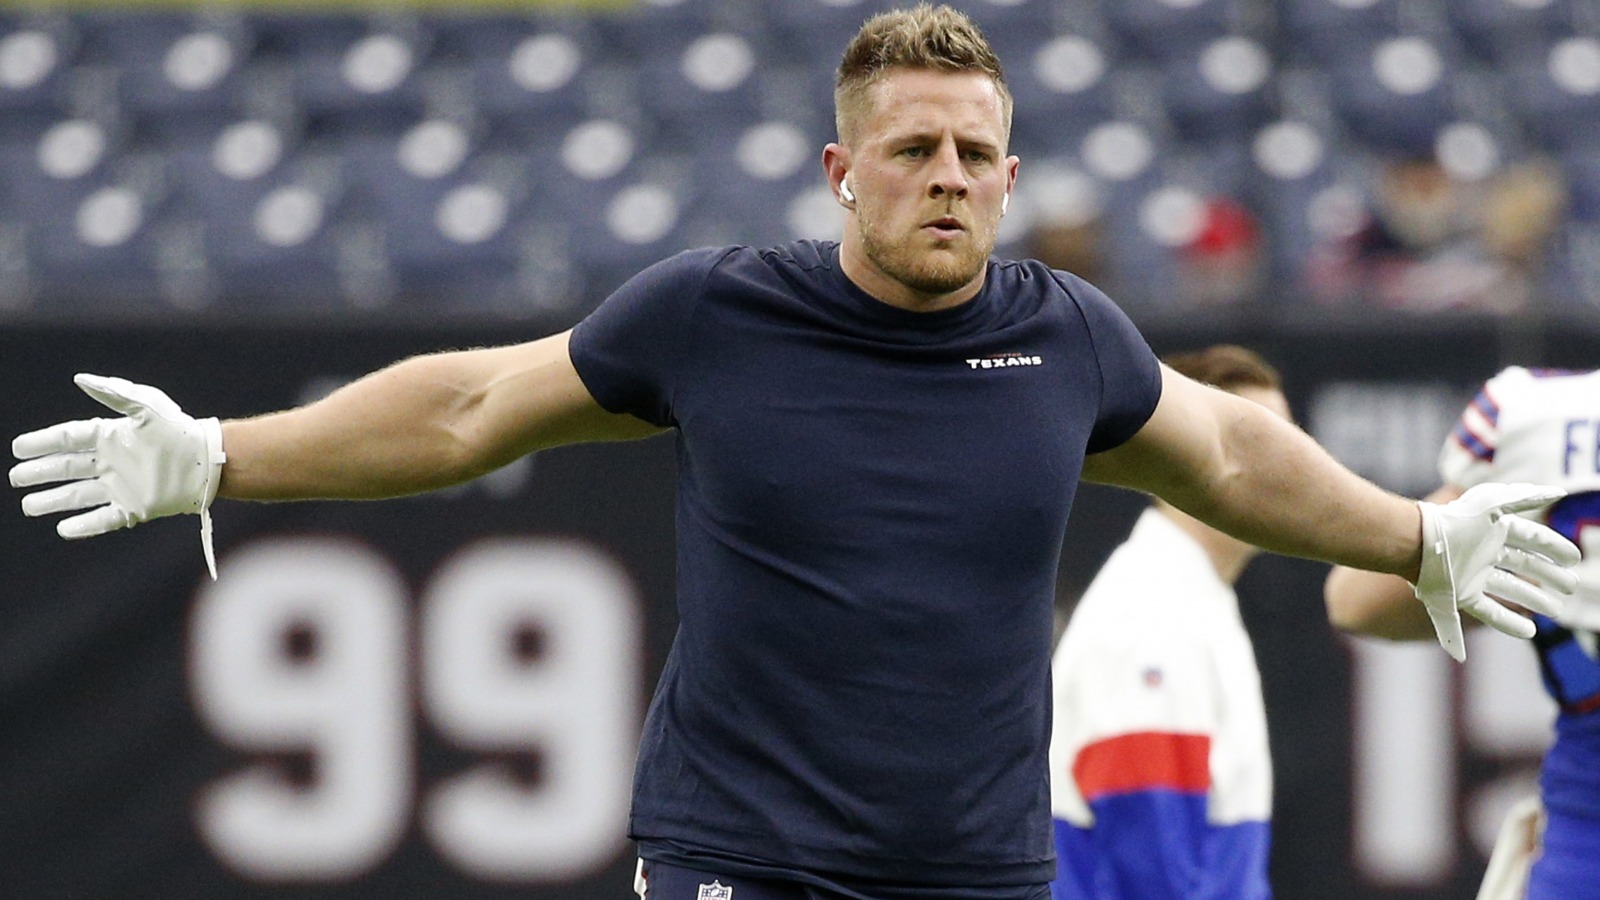 Details You Didn't Know About J.J. Watt